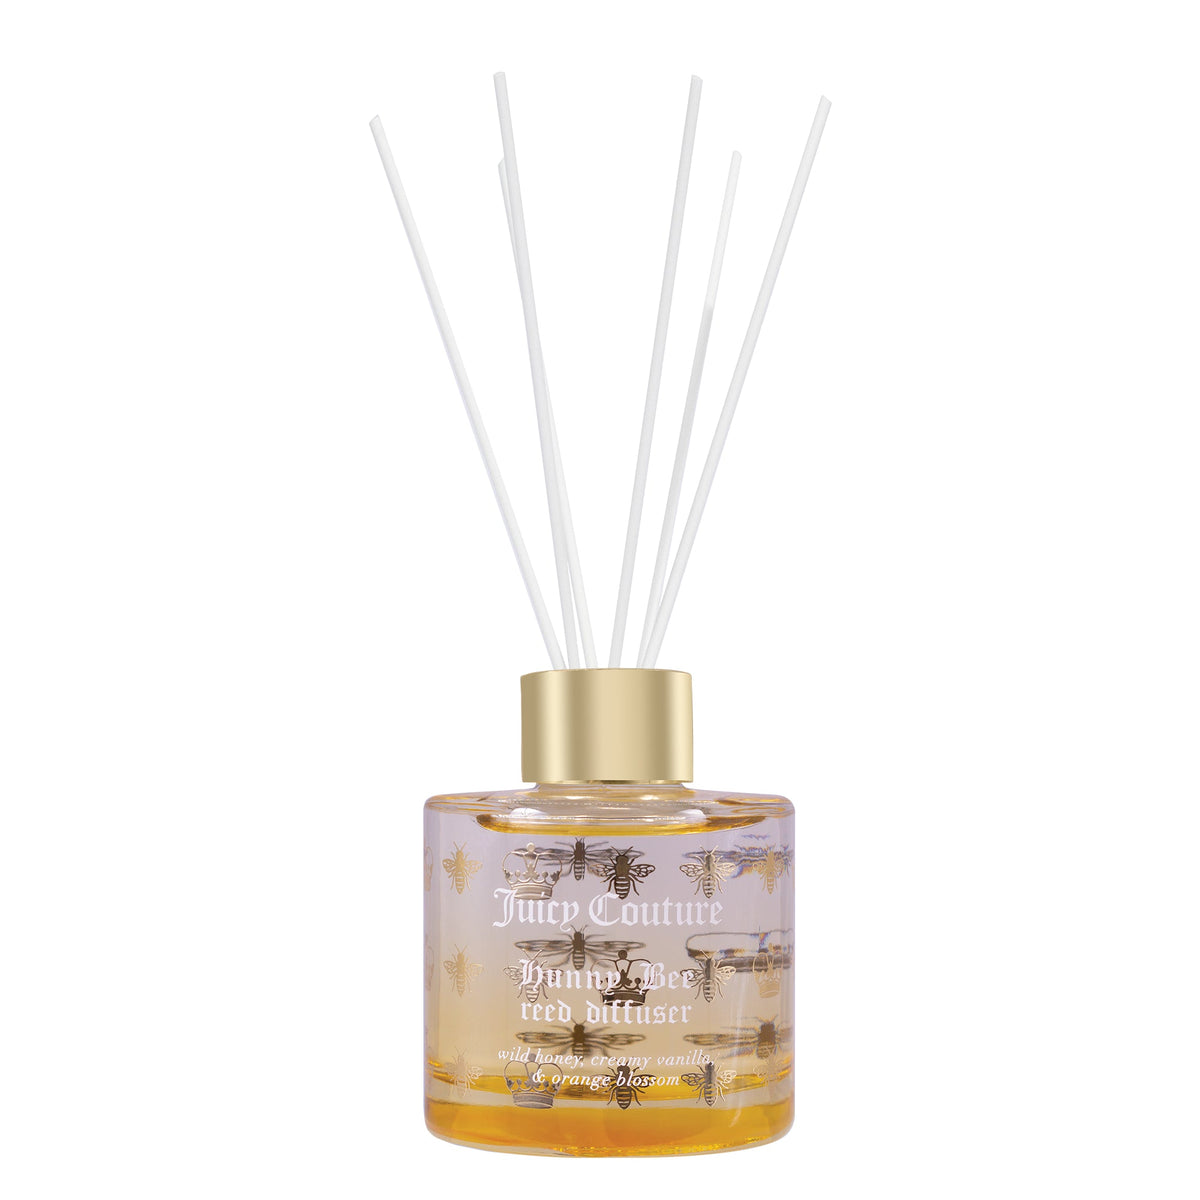 Juicy Couture Hunny Bee Reed Diffuser